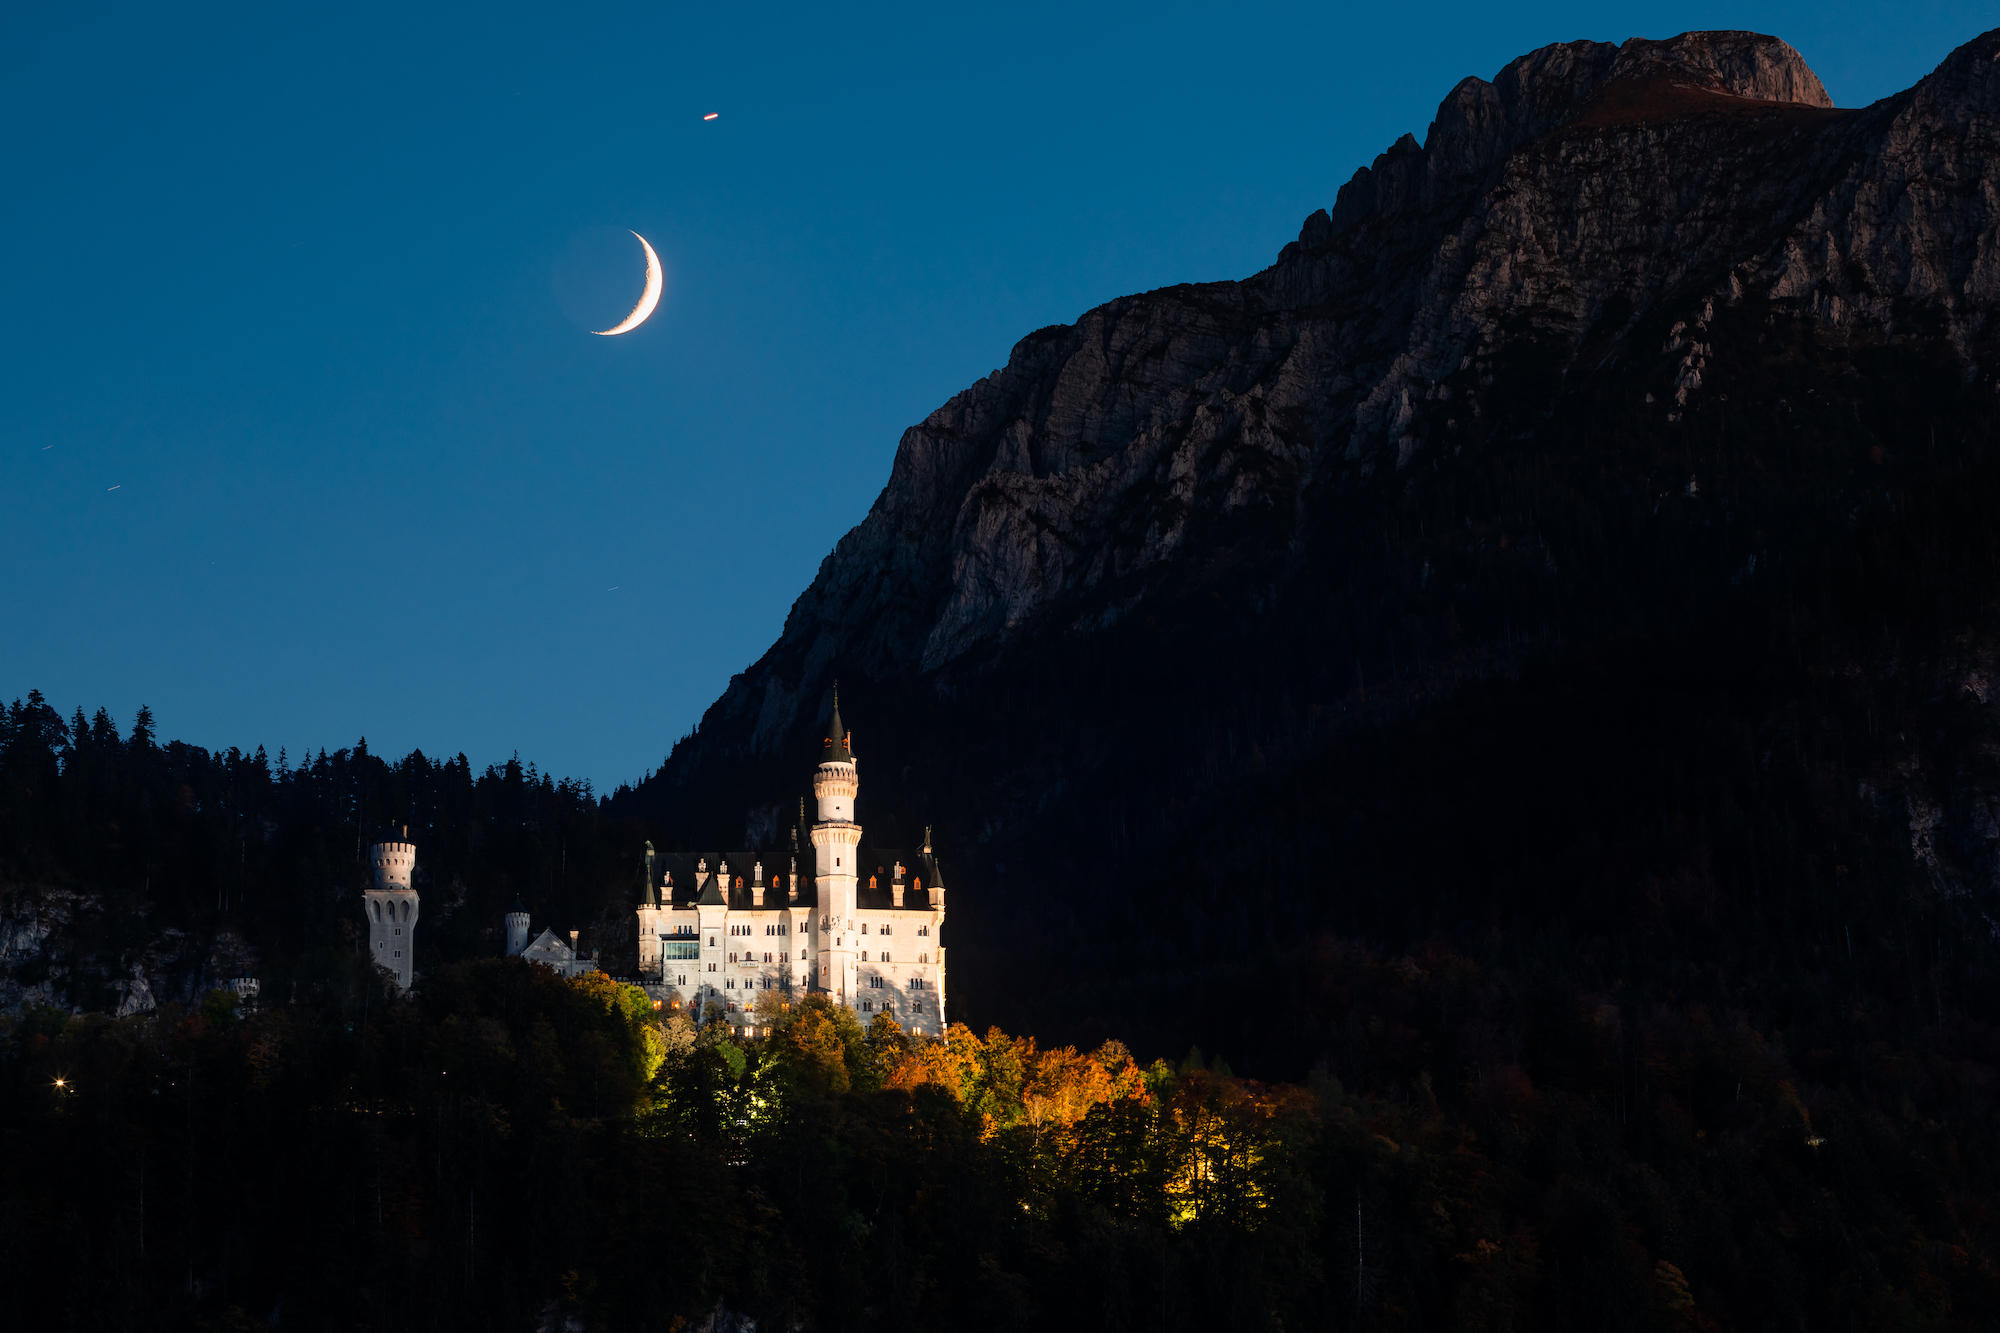 On the side of a mountain the moonlight shines on a large castle and surrounding trees with fall leaves.